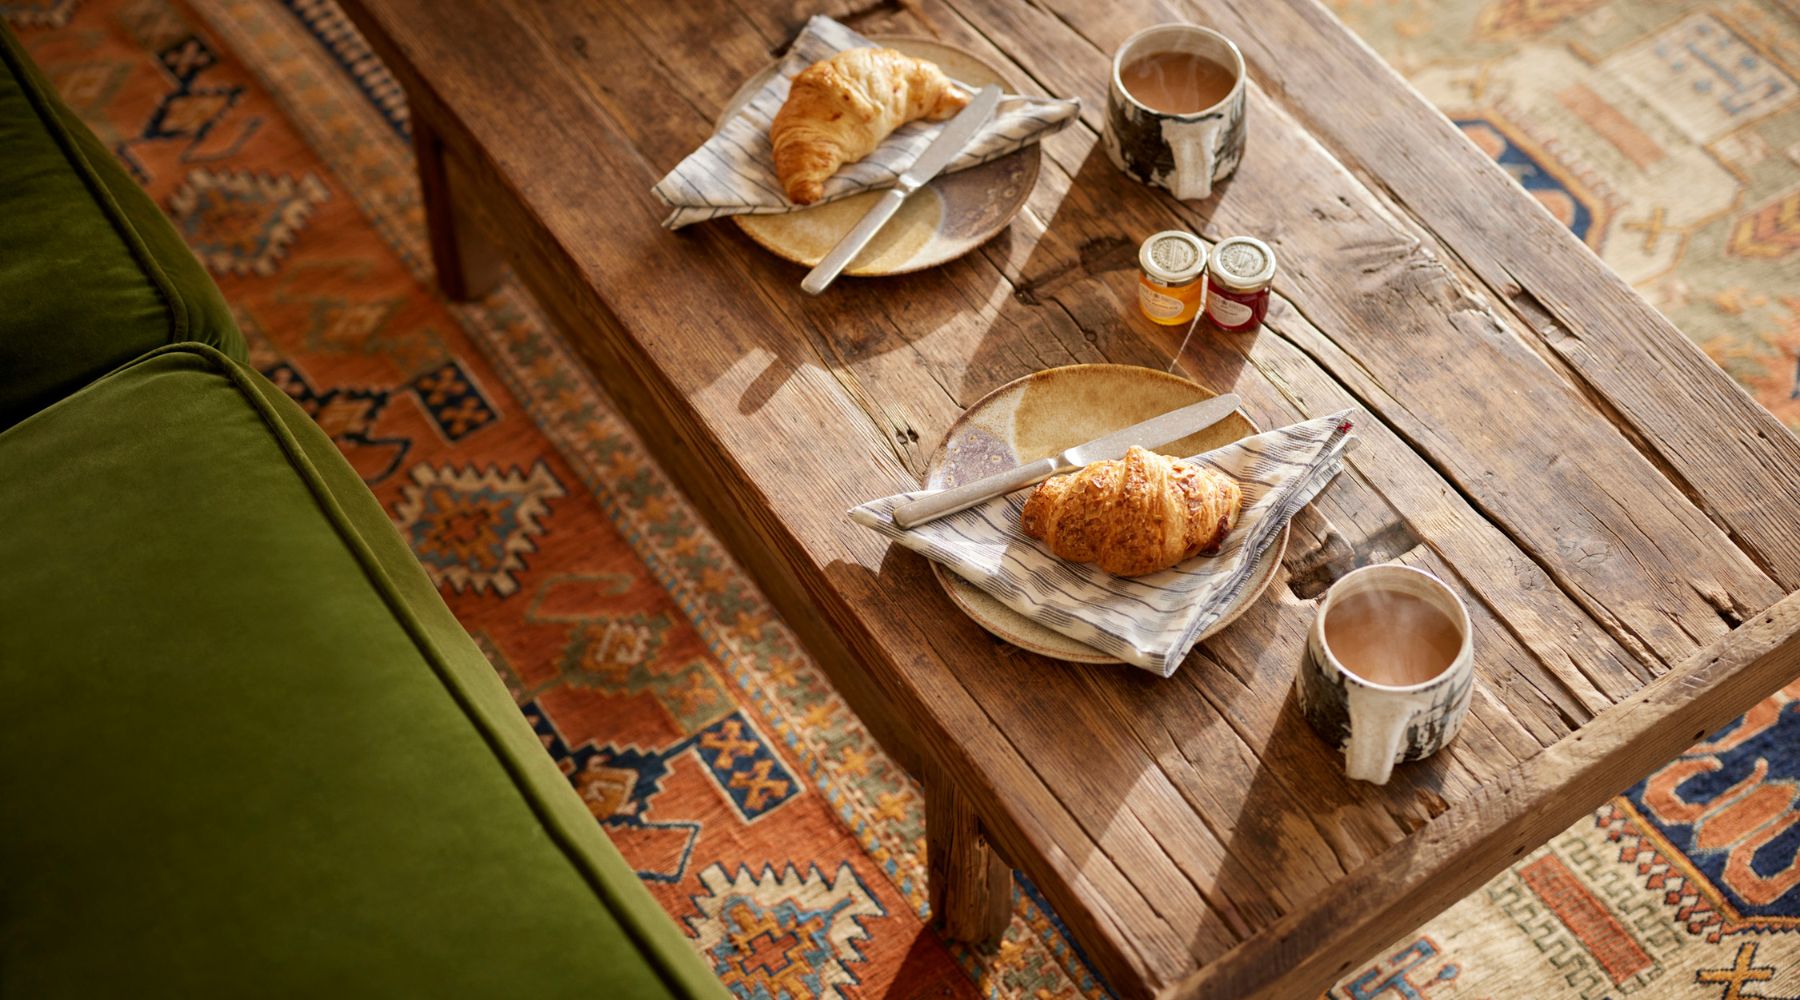 Omaze Million Pound House Lake District - Rustic wooden table with hot coffee and croissants